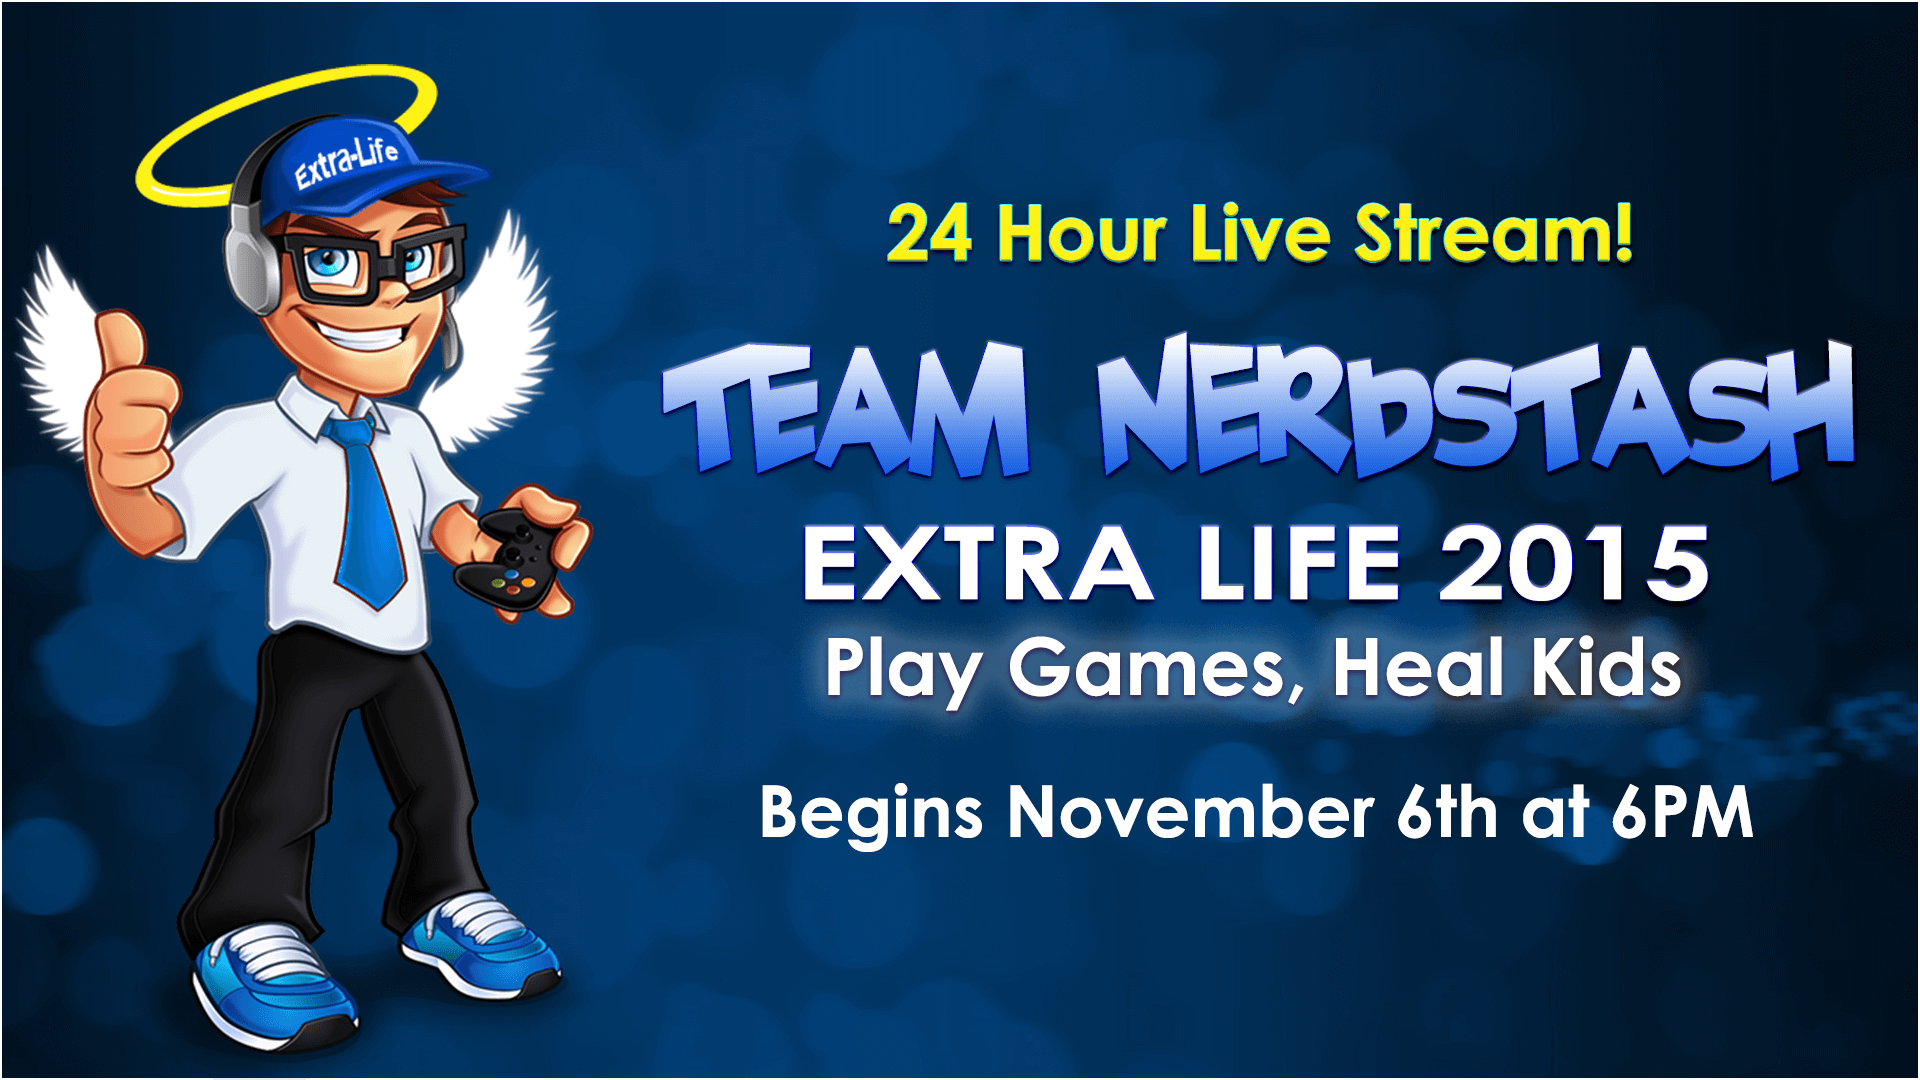 Extra Life: 24 Hours Of Gaming In The Name of Charity!